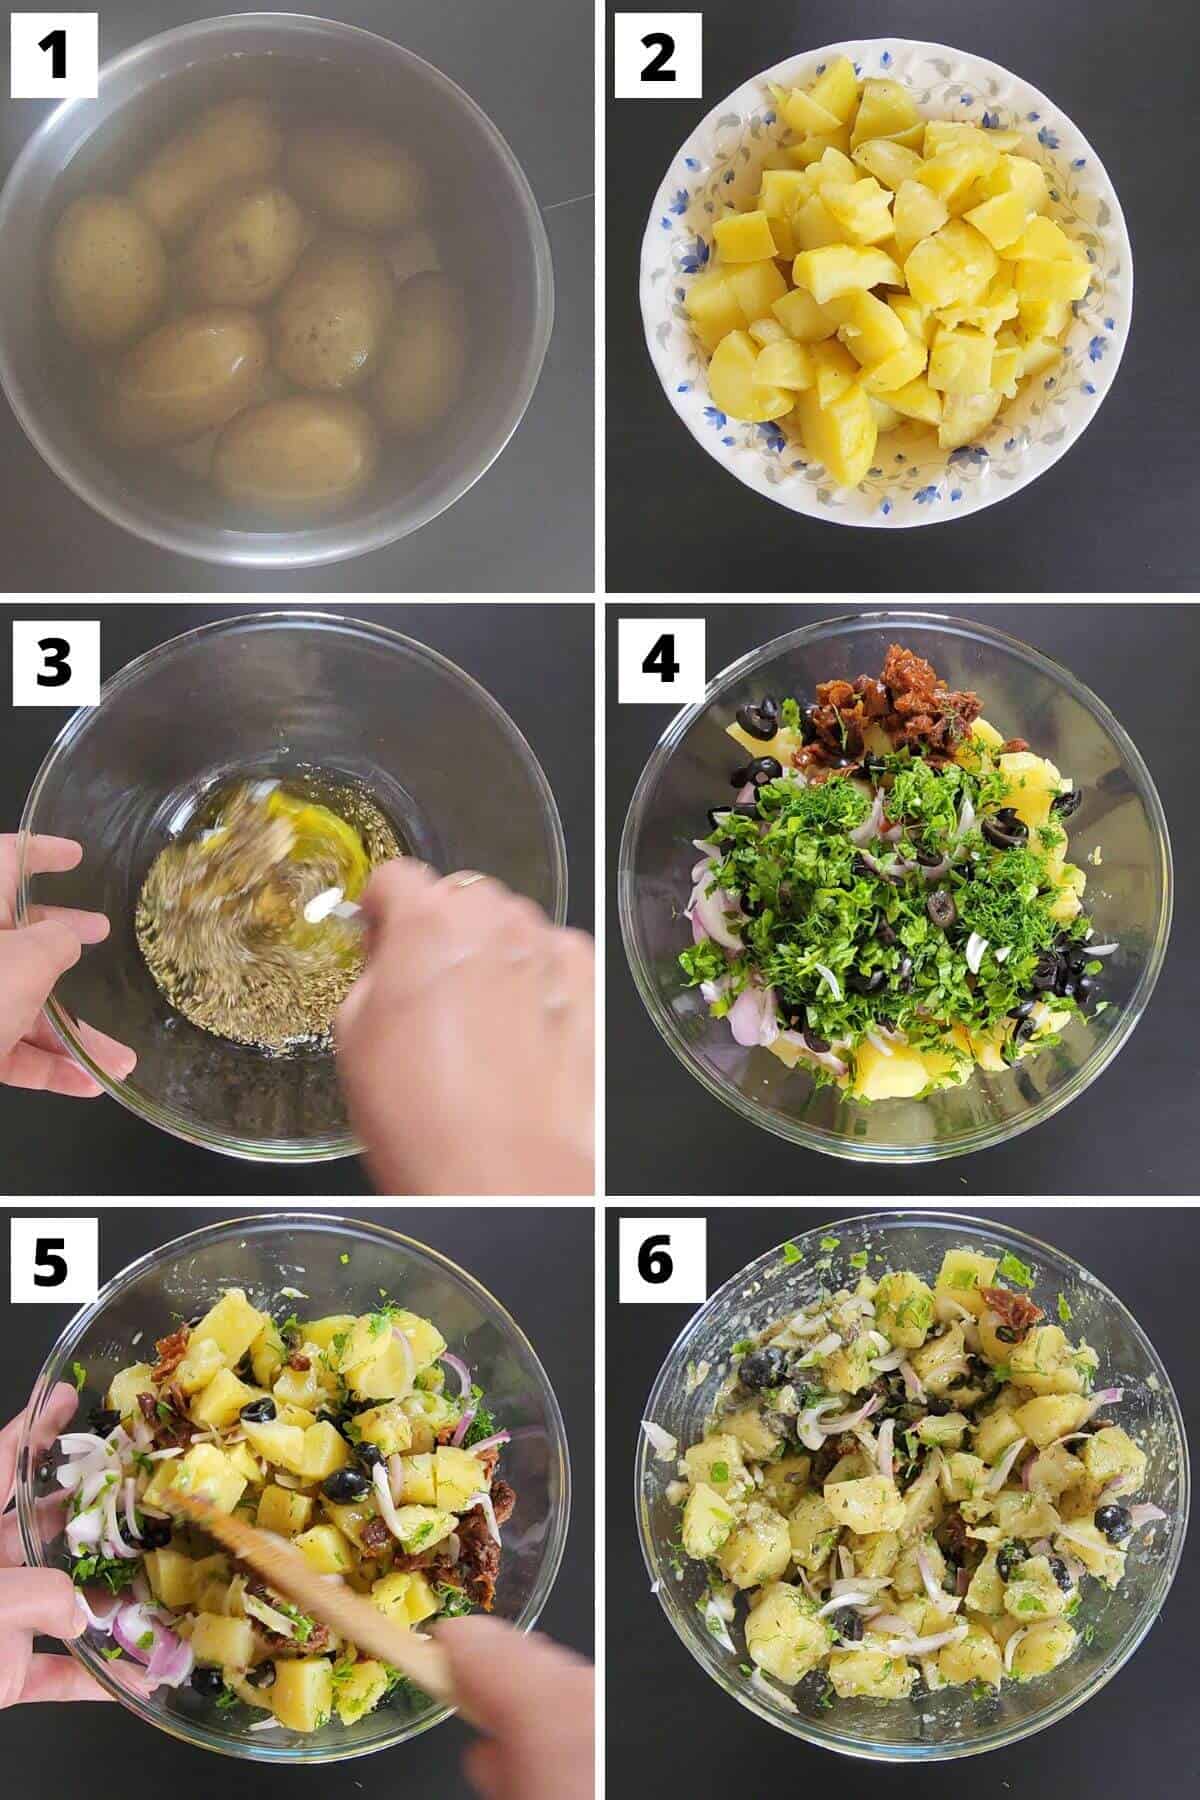 Collage of images of steps 1 to 6 of Greek potato salad recipe.